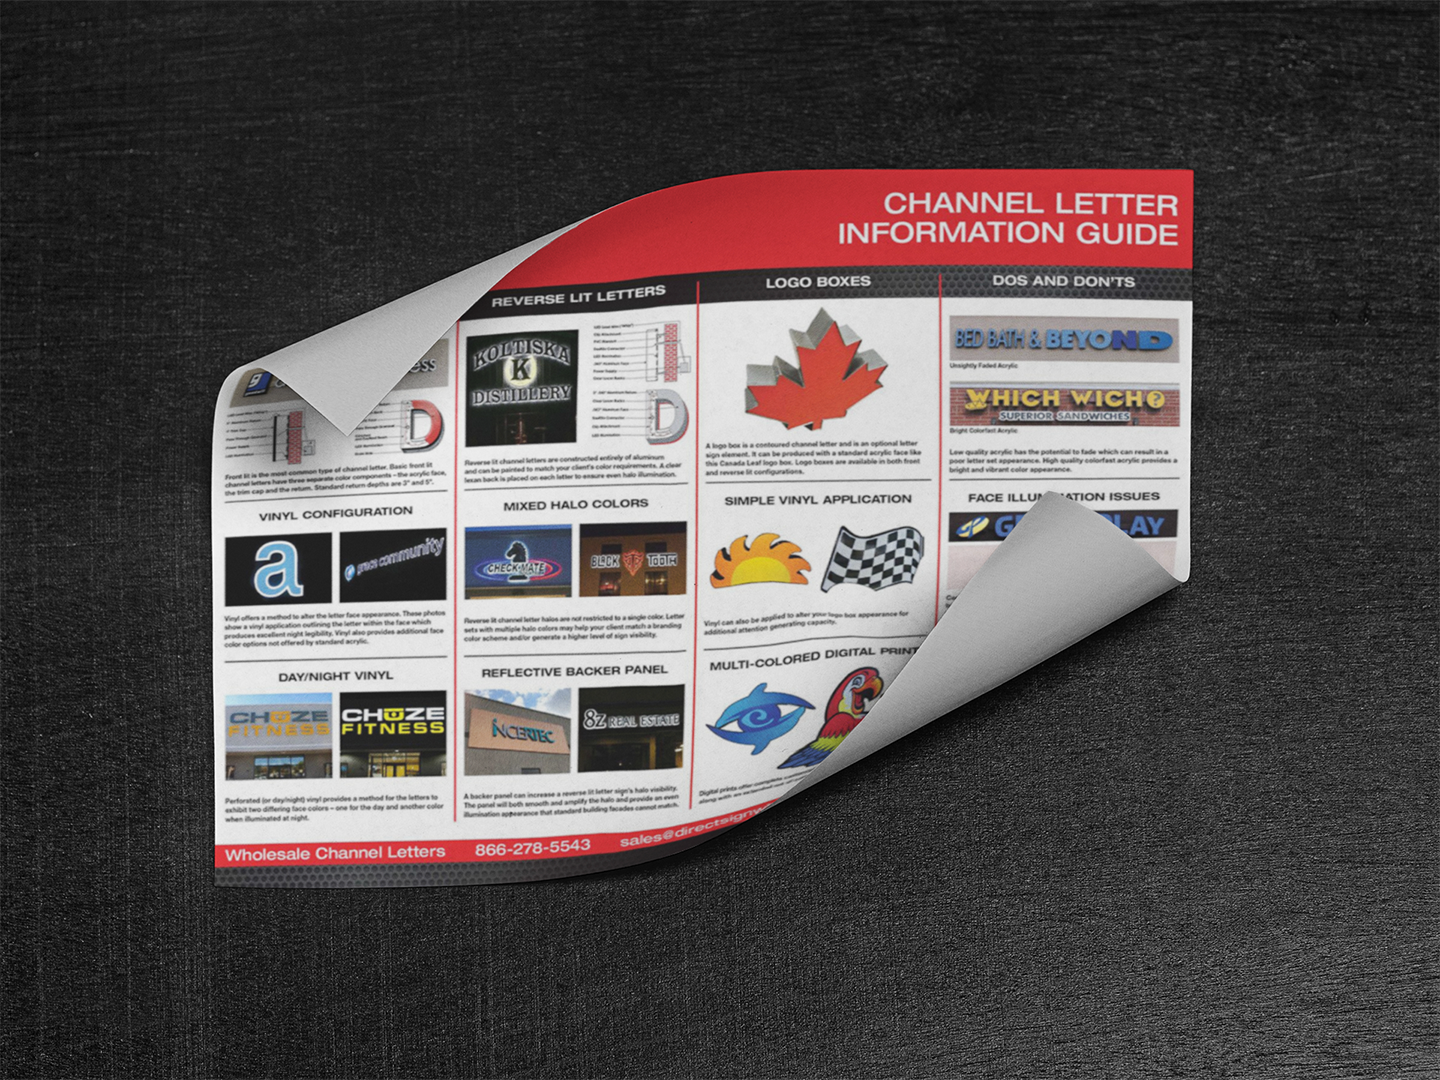 Direct Sign Wholesale Channel Letter Information Guide